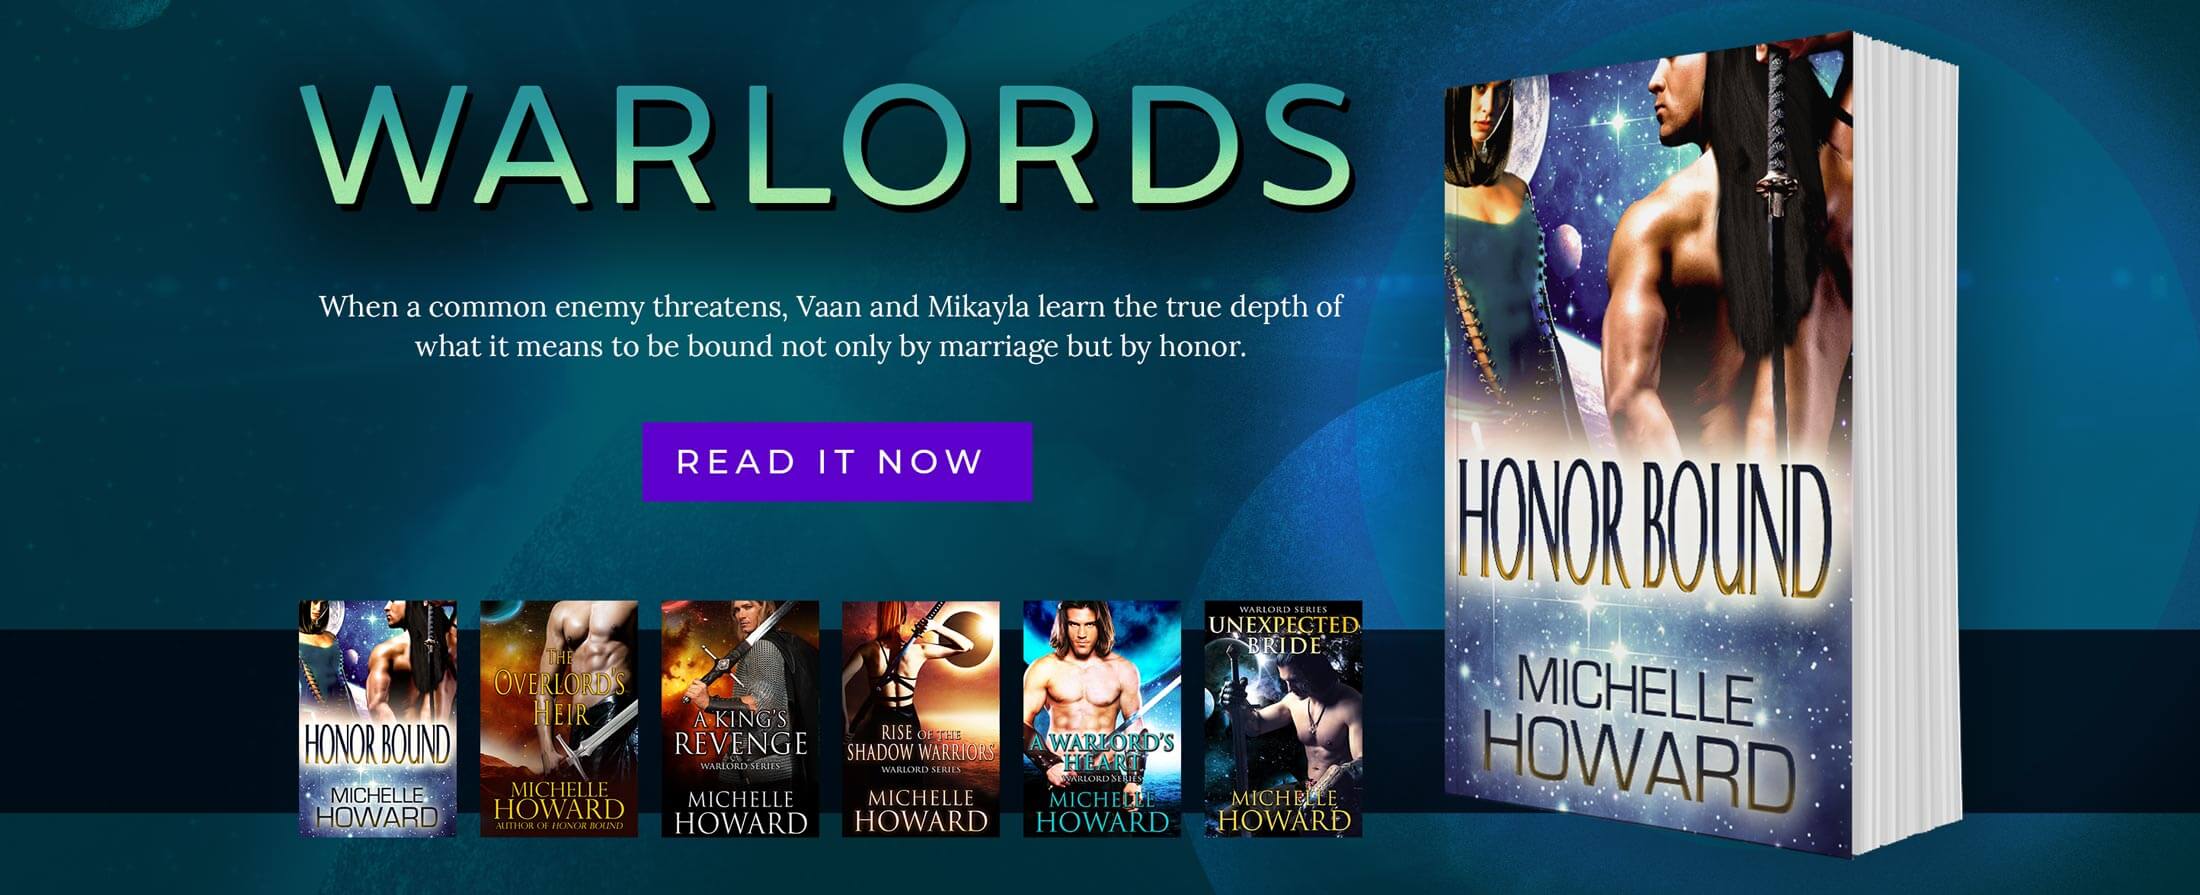 Honor Bound - the latest in the Warlords series by Romance Author Michelle Howard